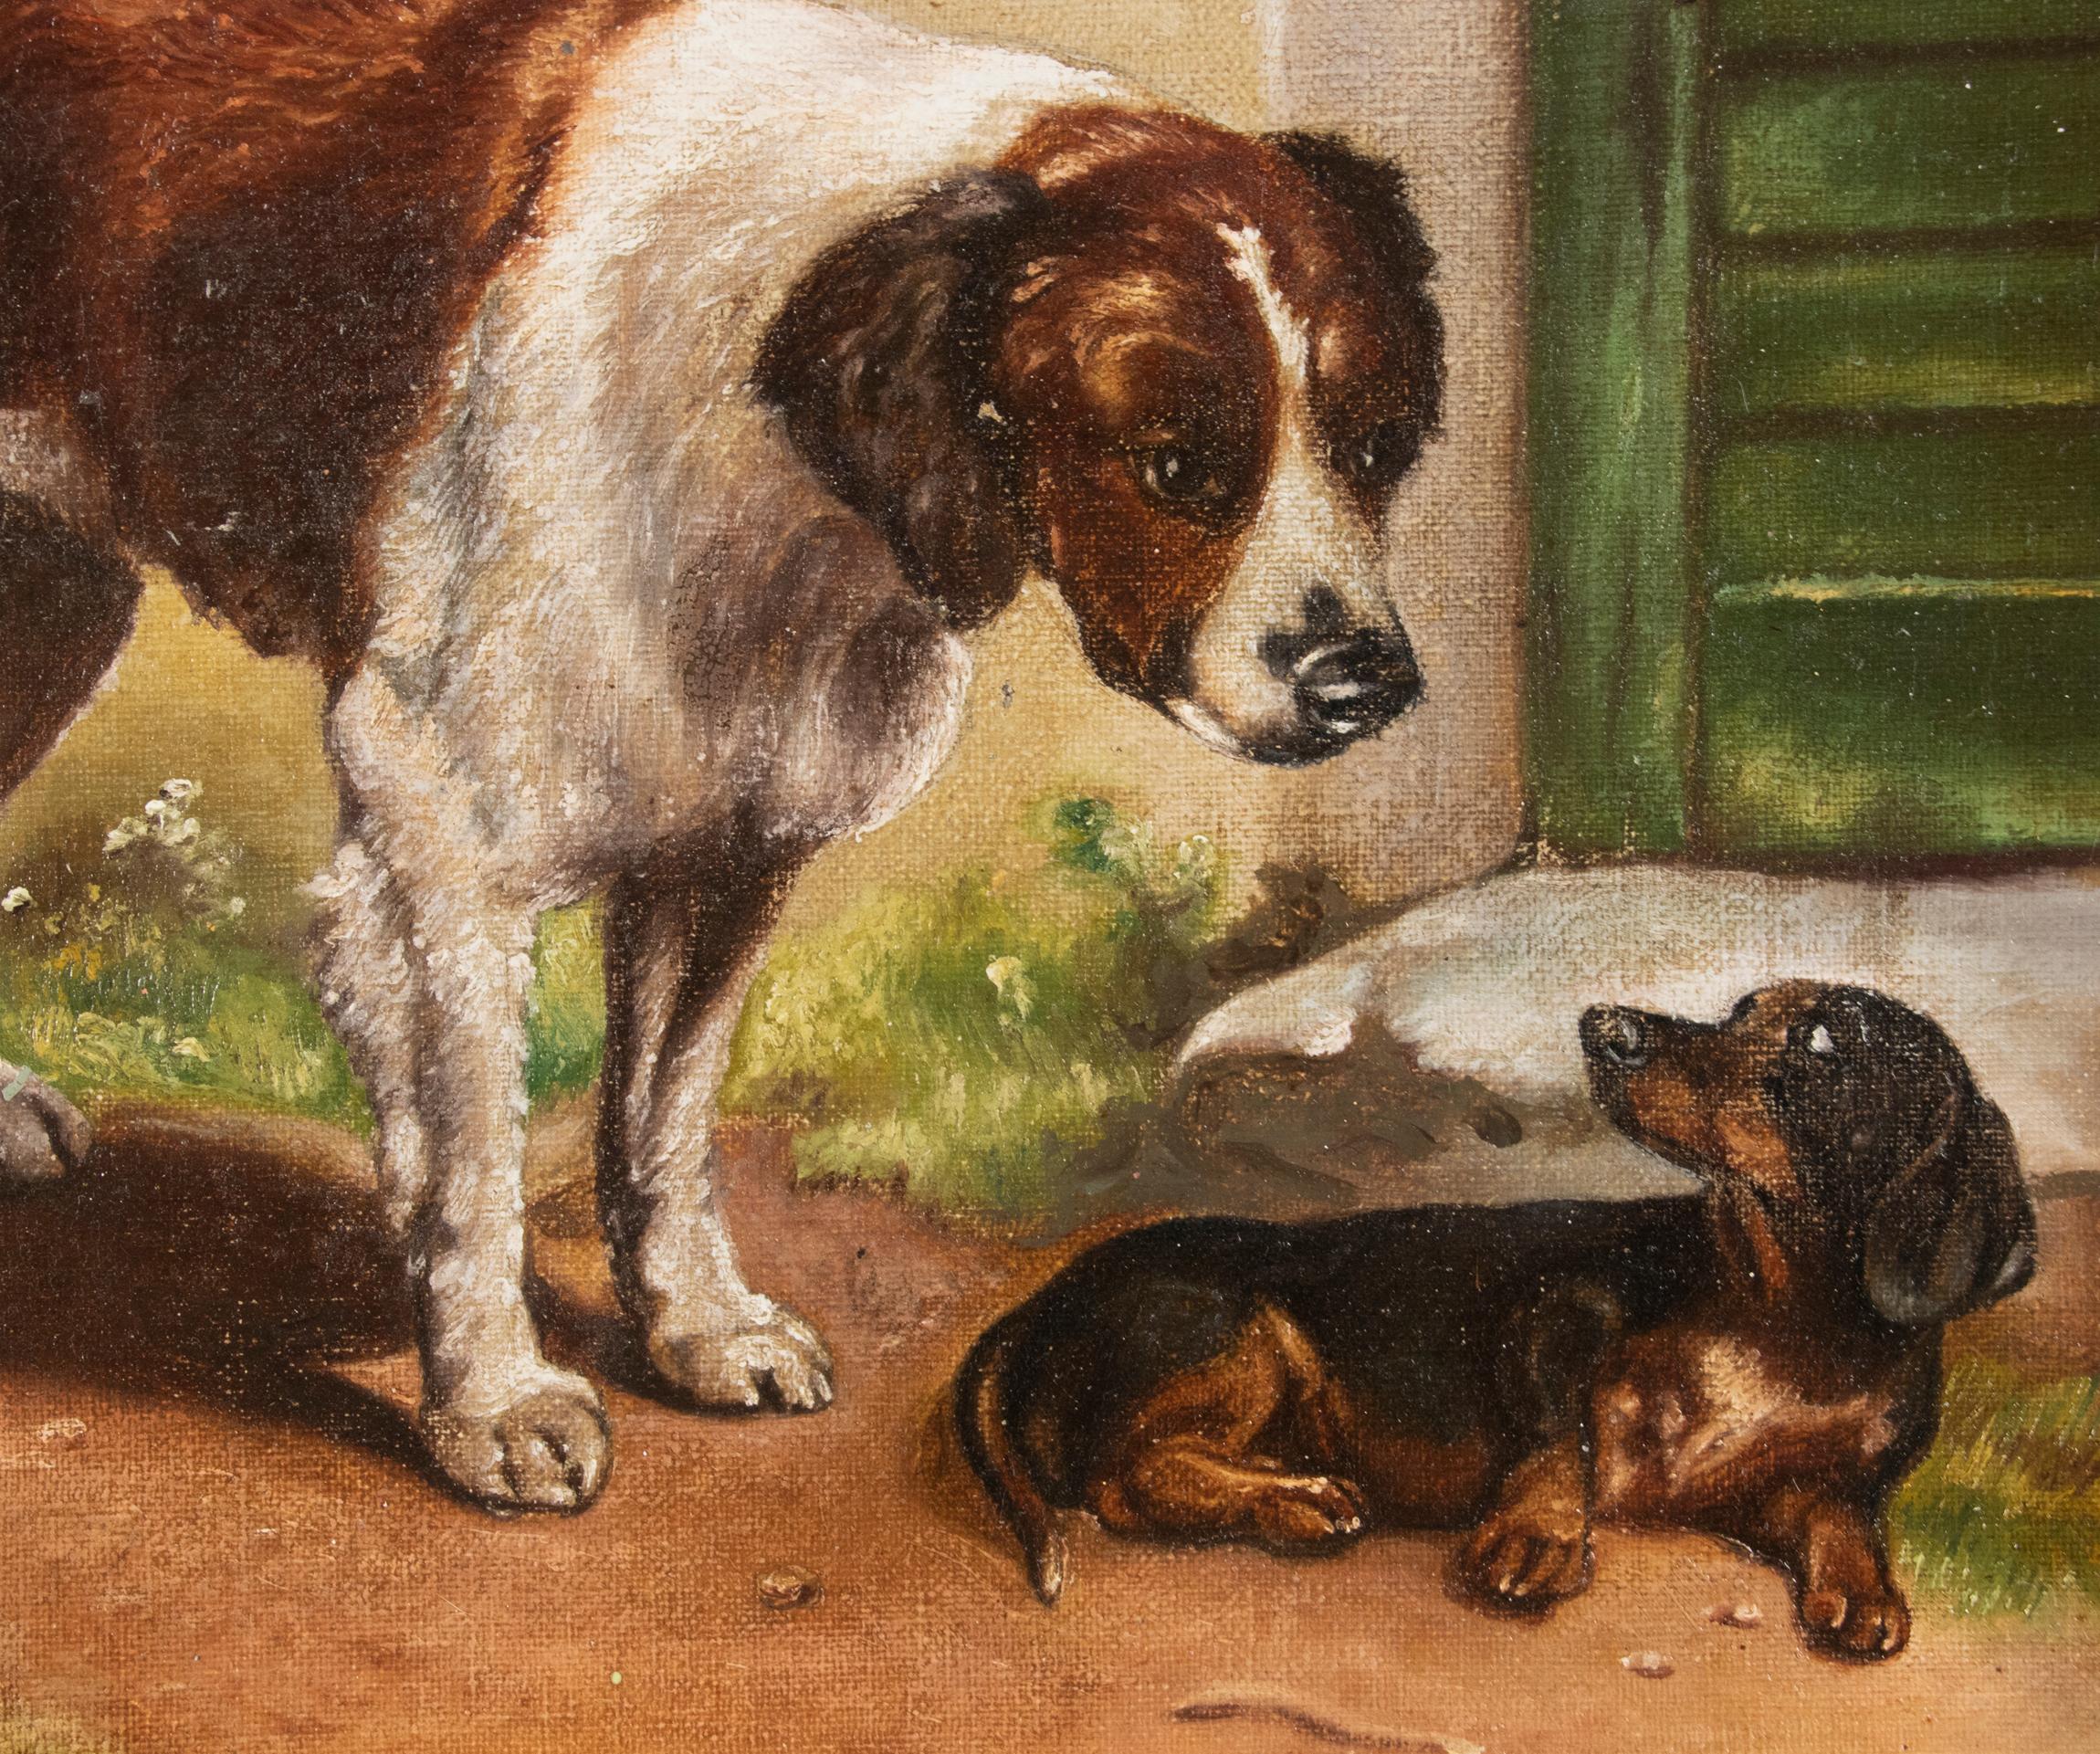 Hand-Painted Antique Belgium Oil Painting Border Collie and a Dachshund Dog, A van de Venne